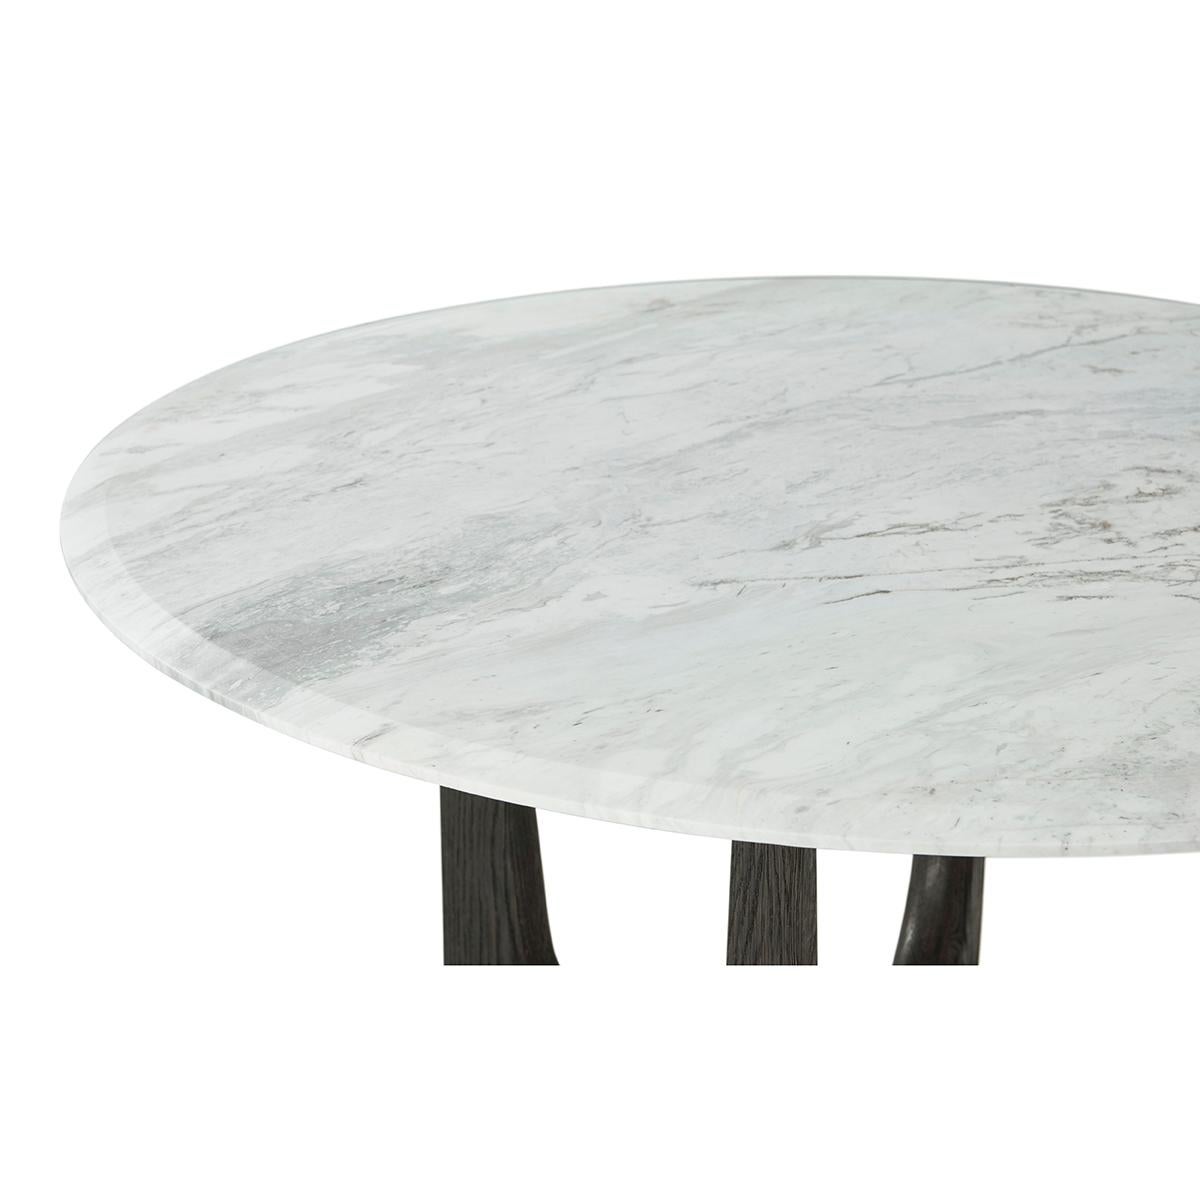 Vietnamese Dark Oak and Marble Round Dining Table For Sale